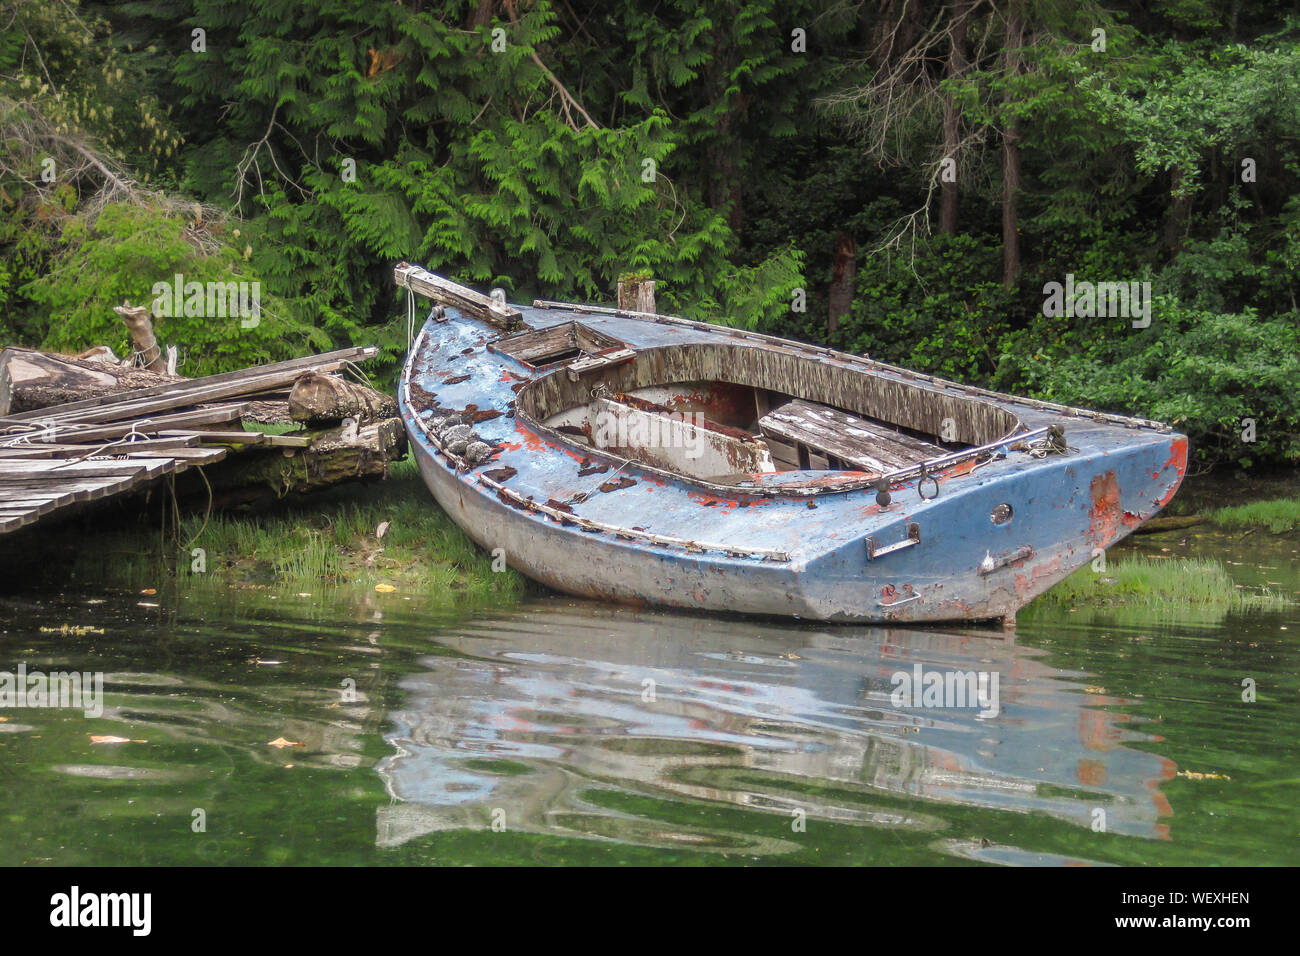 A derelict, stripped down old dayboat sits partly on the grassy shore at a ramshackle dock in a coastal lagoon beside the forest (British Columbia). Stock Photo